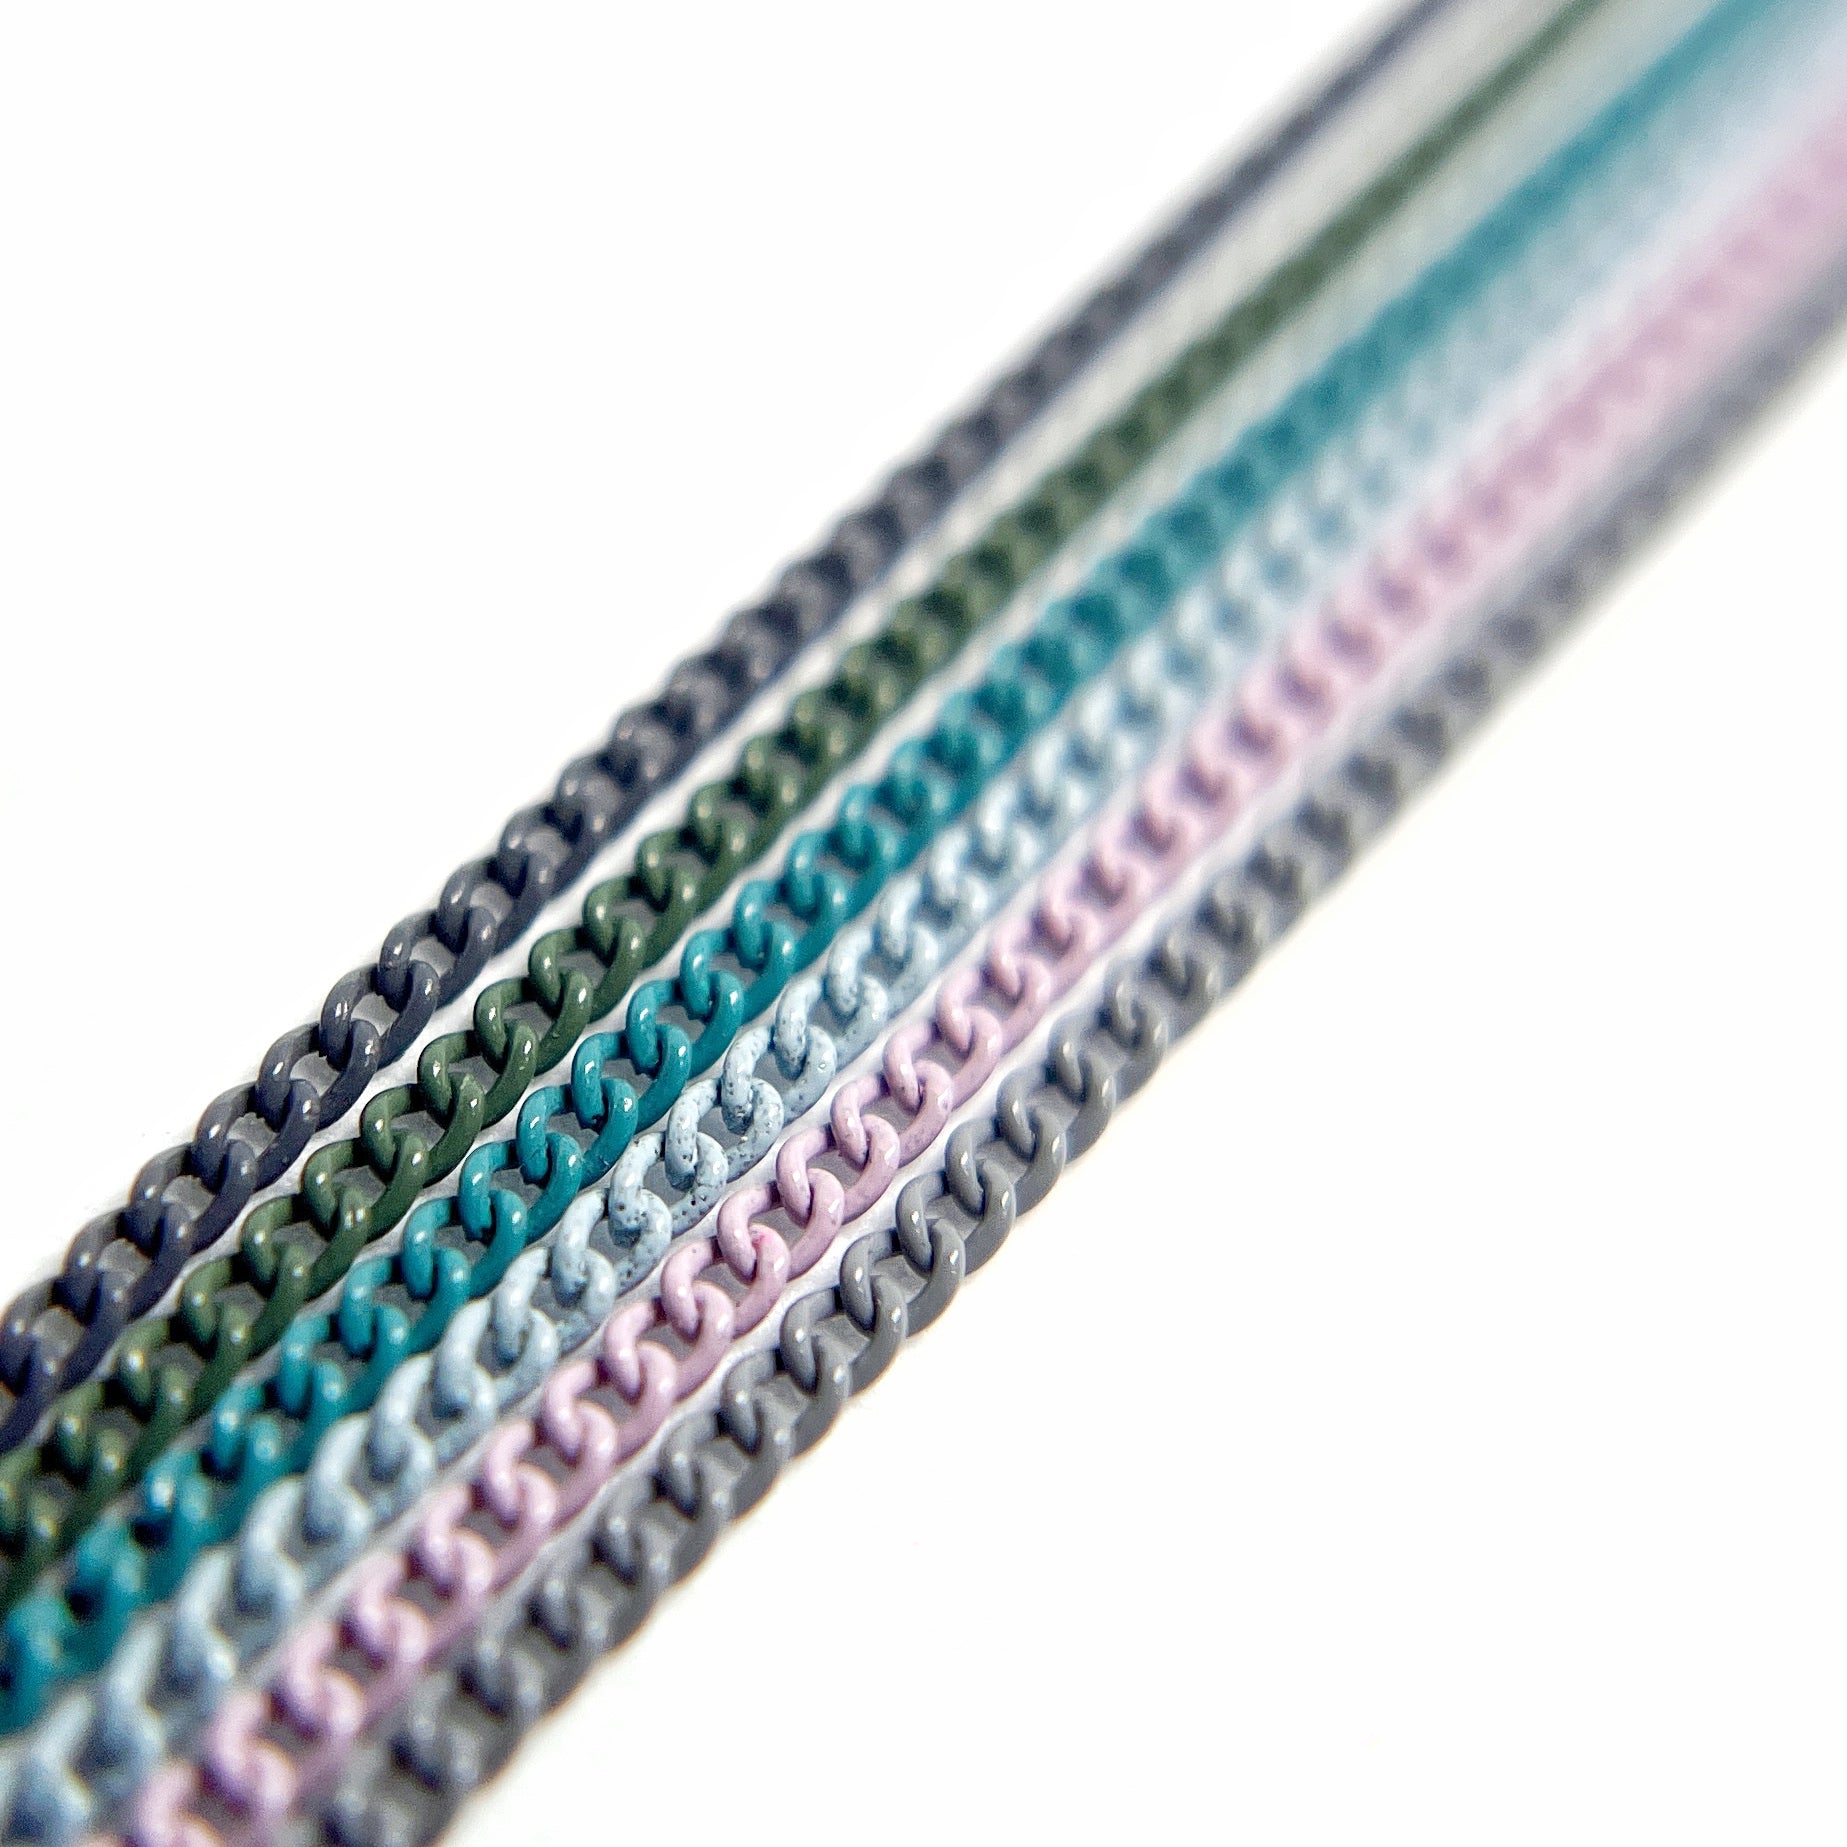 Close-Up of Multi-Color Nail Art Chains in cool blue, green and purple tones on White Background.